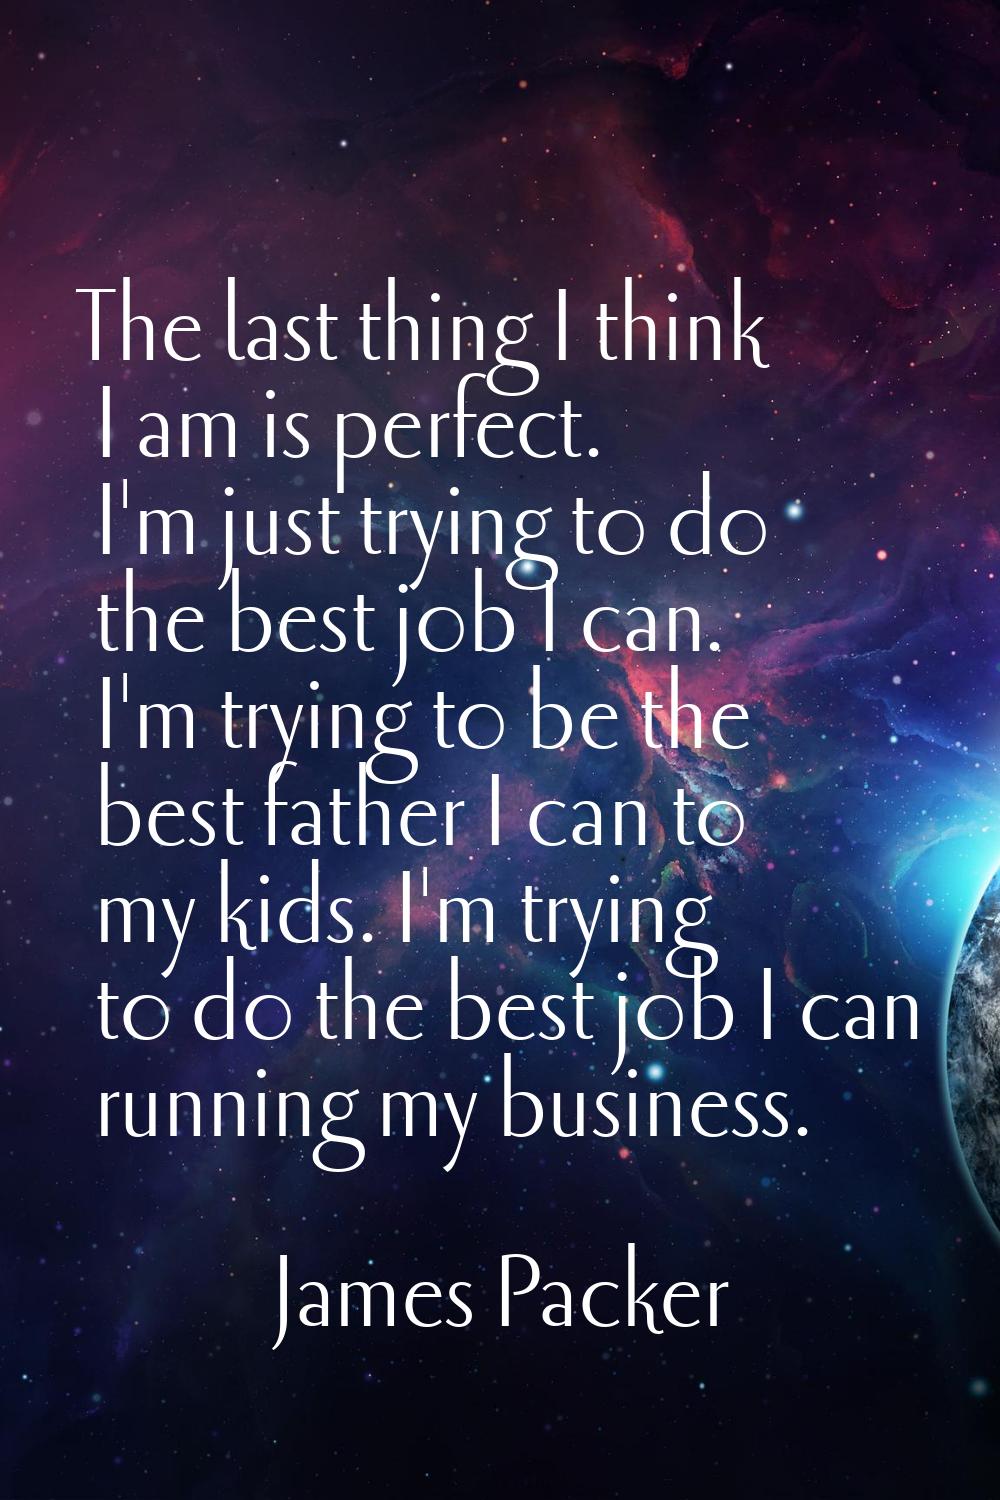 The last thing I think I am is perfect. I'm just trying to do the best job I can. I'm trying to be 